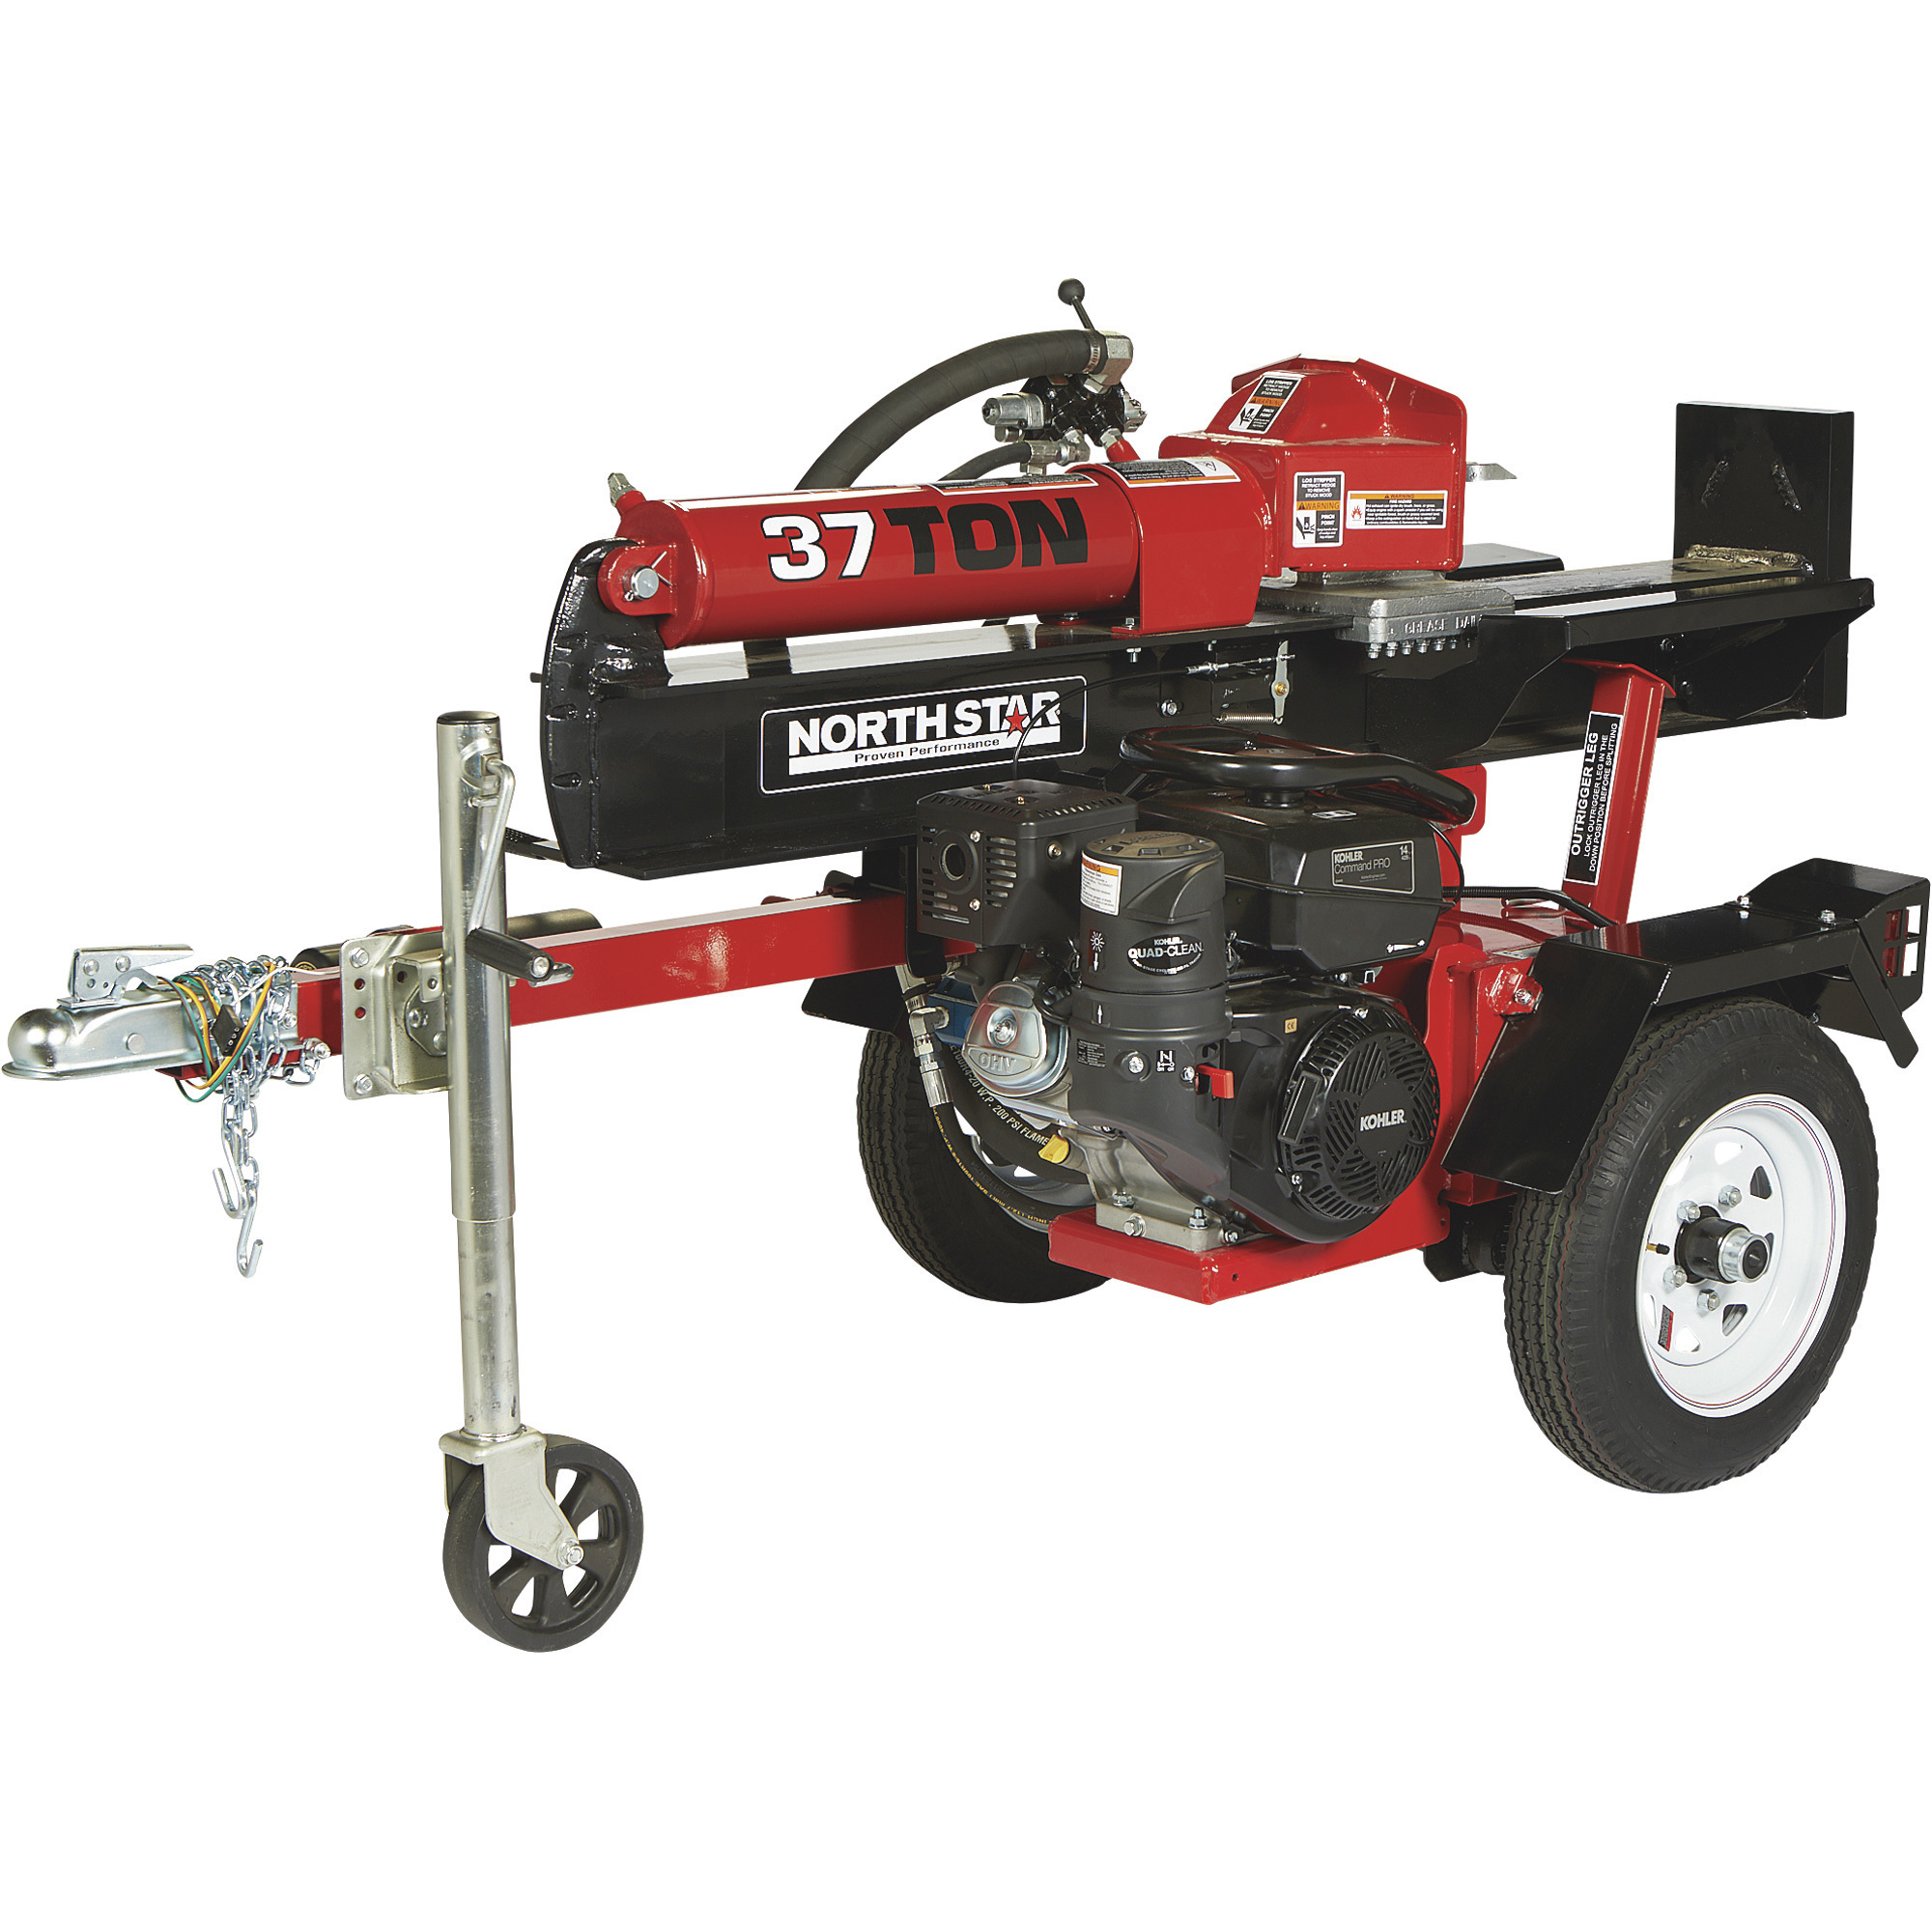 NorthStar Deluxe Horizontal/Vertical Log Splitter with Tow Package, 37-Ton Ram Force, 429cc Kohler CH440 Engine